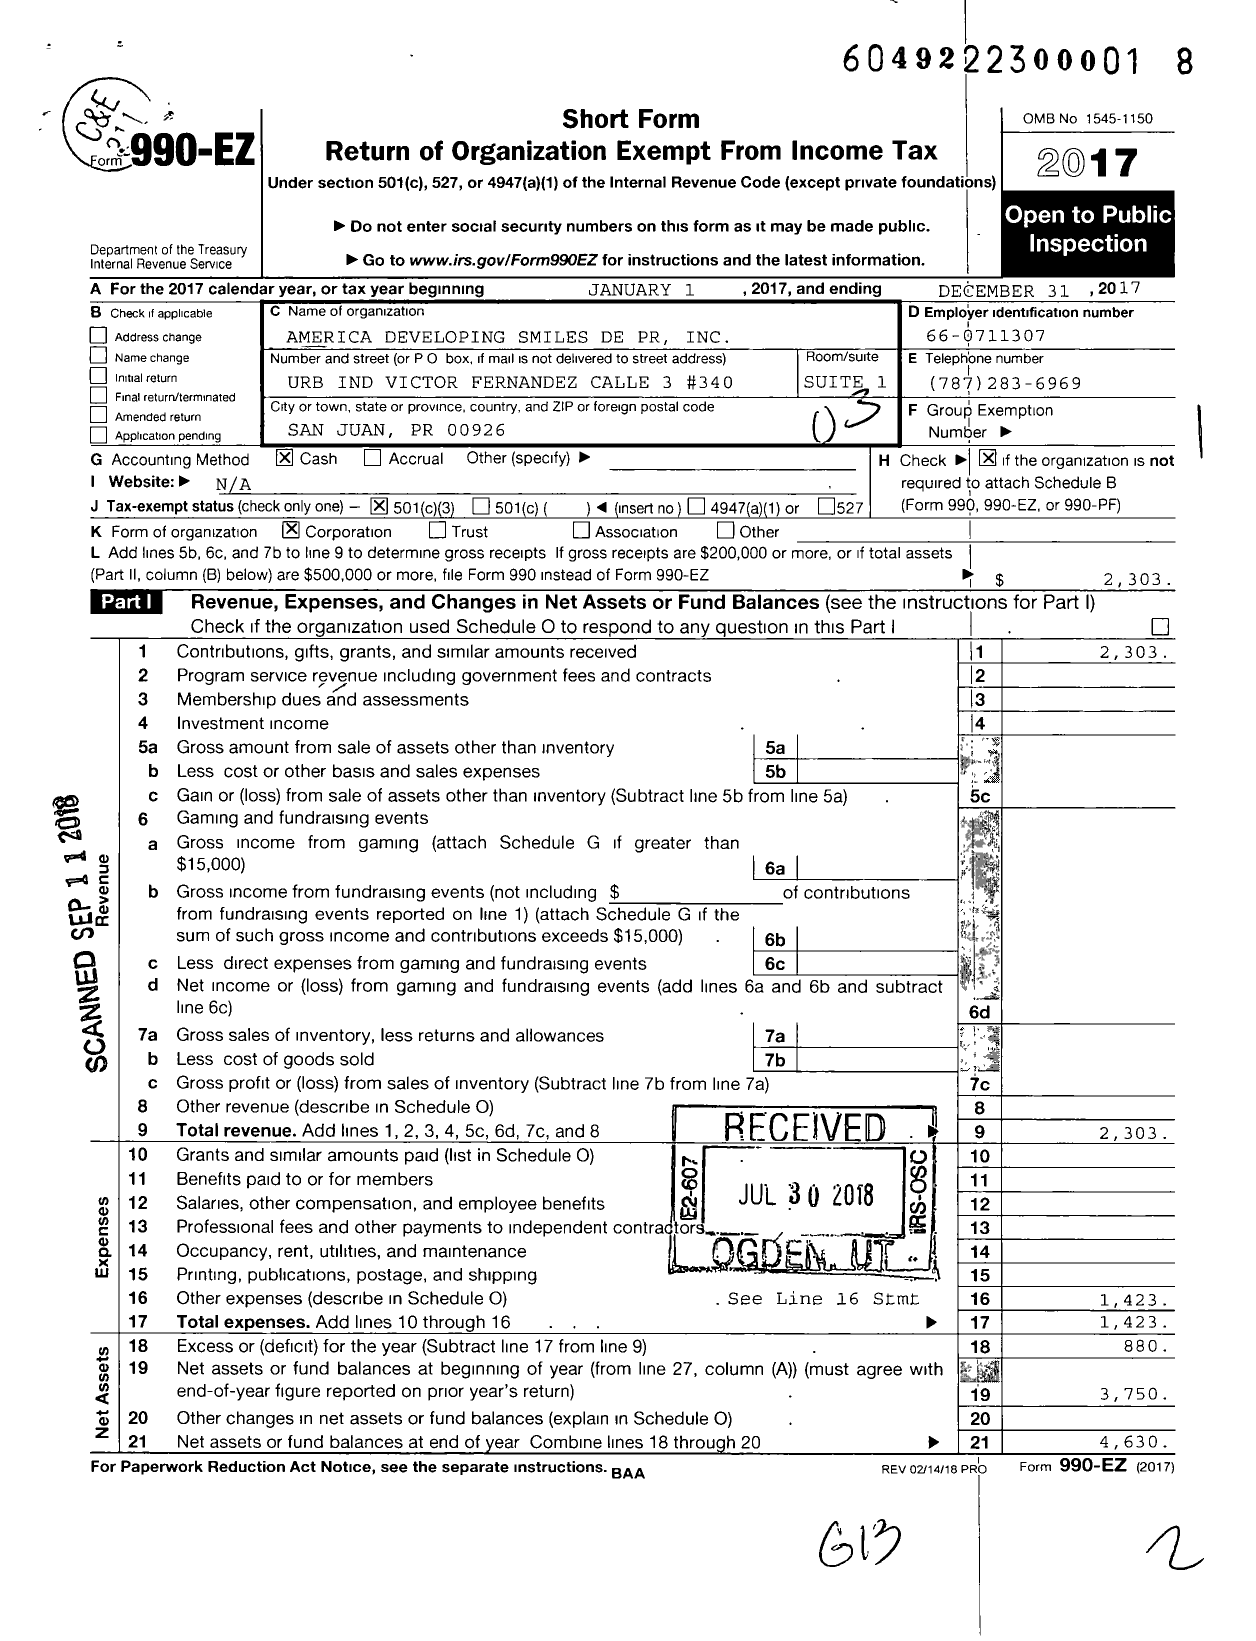 Image of first page of 2017 Form 990EZ for America Developing Smiles de PR